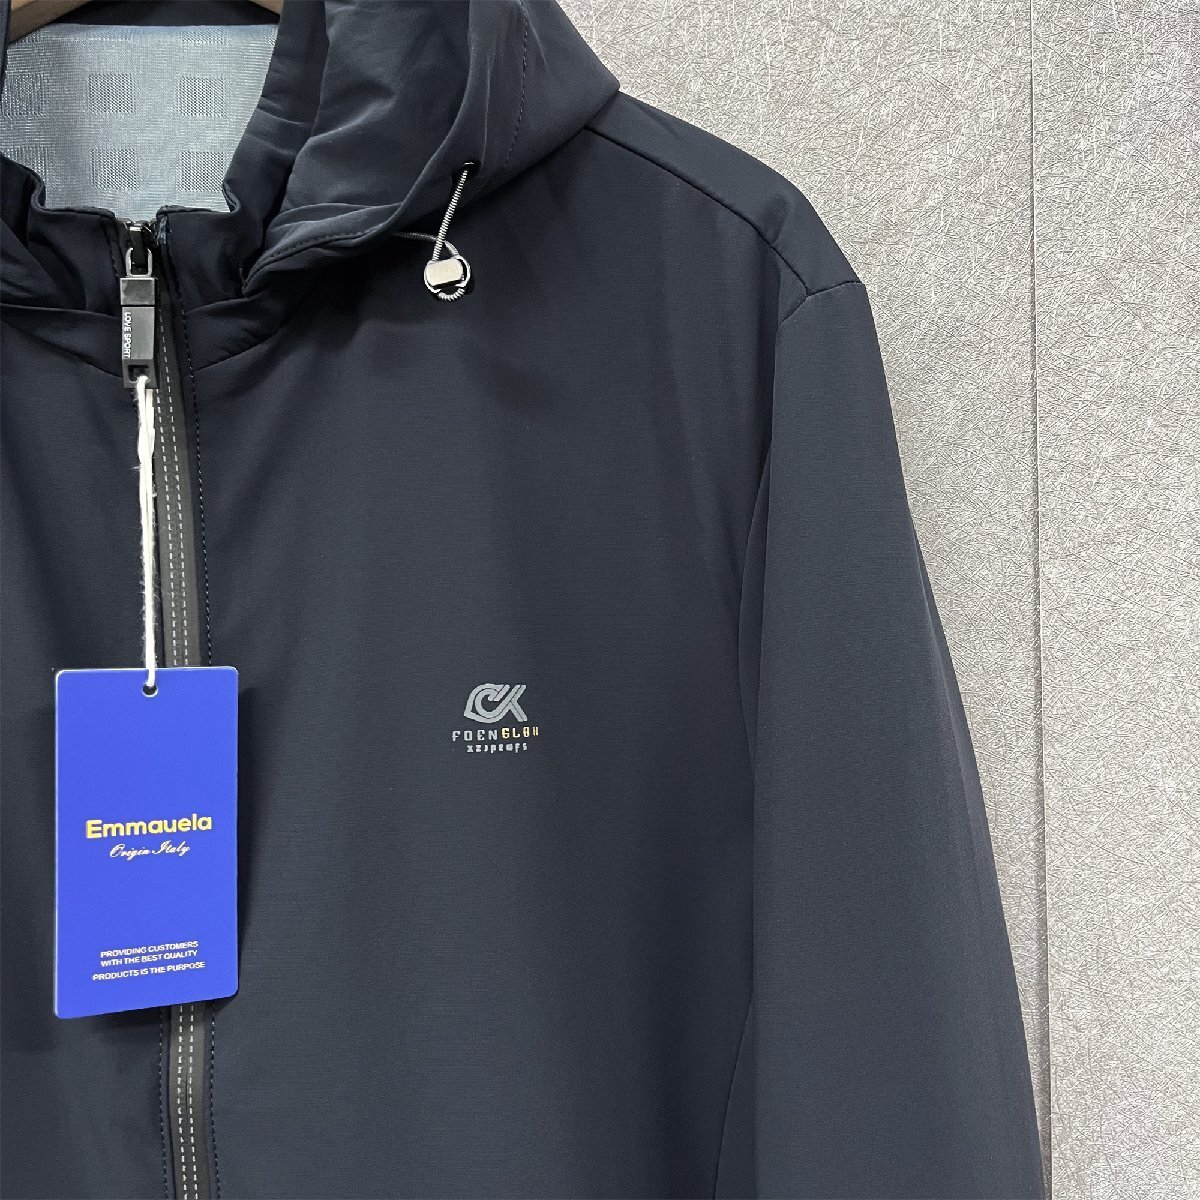  highest grade * jacket regular price 7 ten thousand *Emmauela* Italy * milano departure * on goods water-repellent stylish .. simple light outer mountain climbing clothes usually put on XL/50 size 